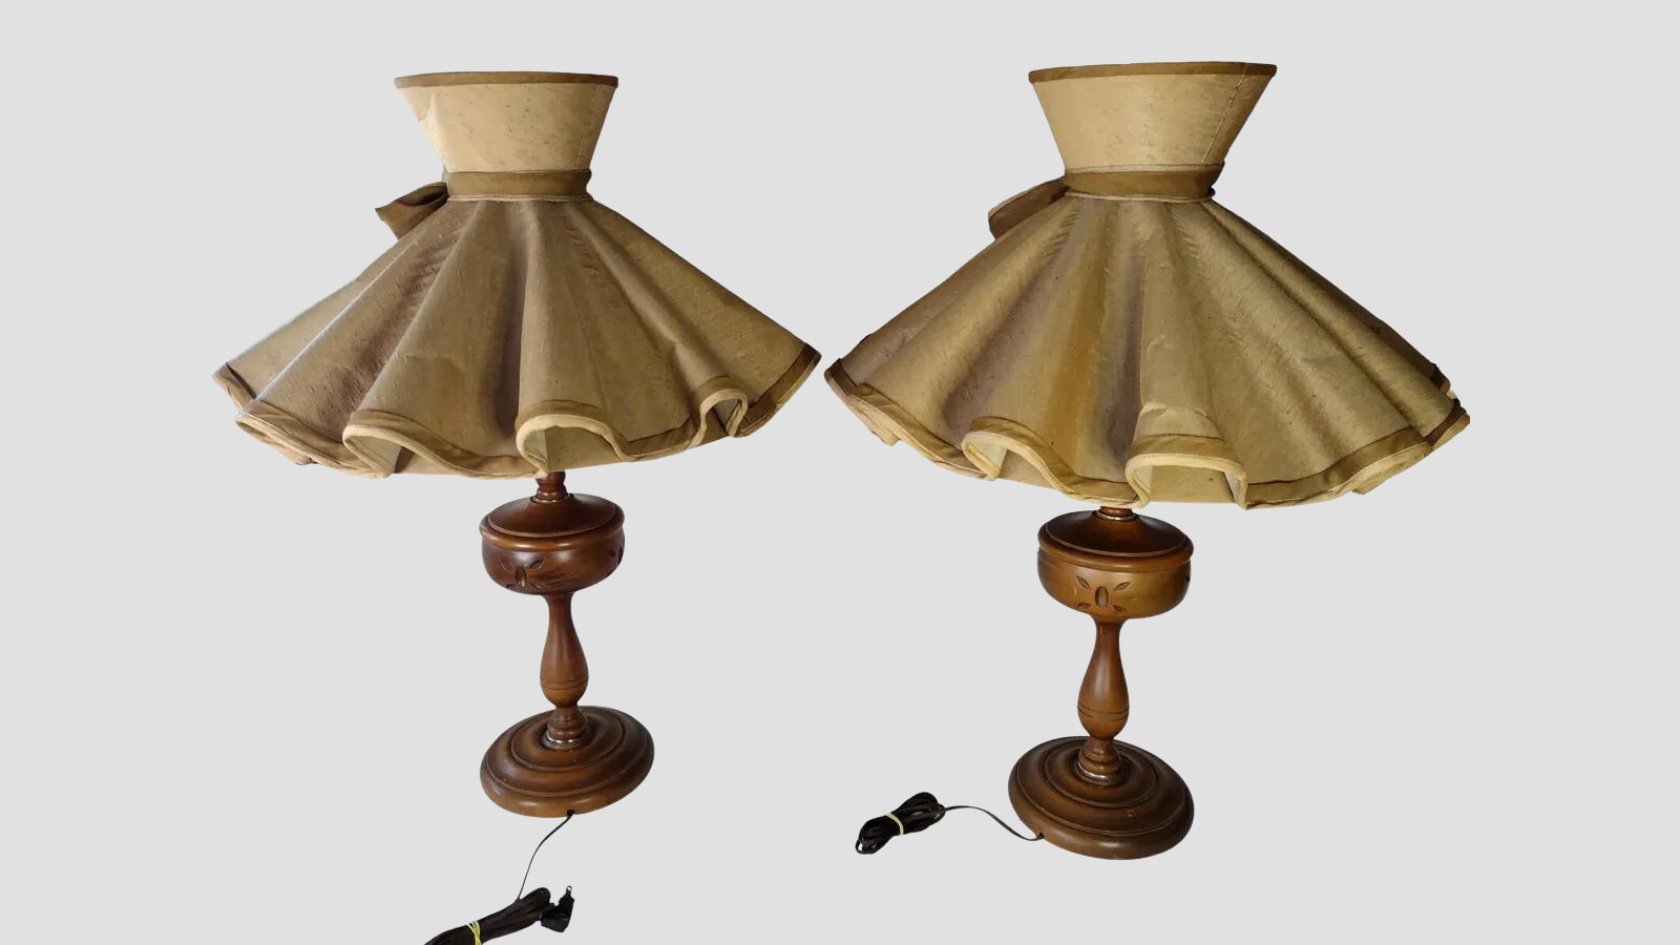 How To Make Vintage Pair Of Early American Colonial Style Table Lamps With Ruffled Fabric Shade